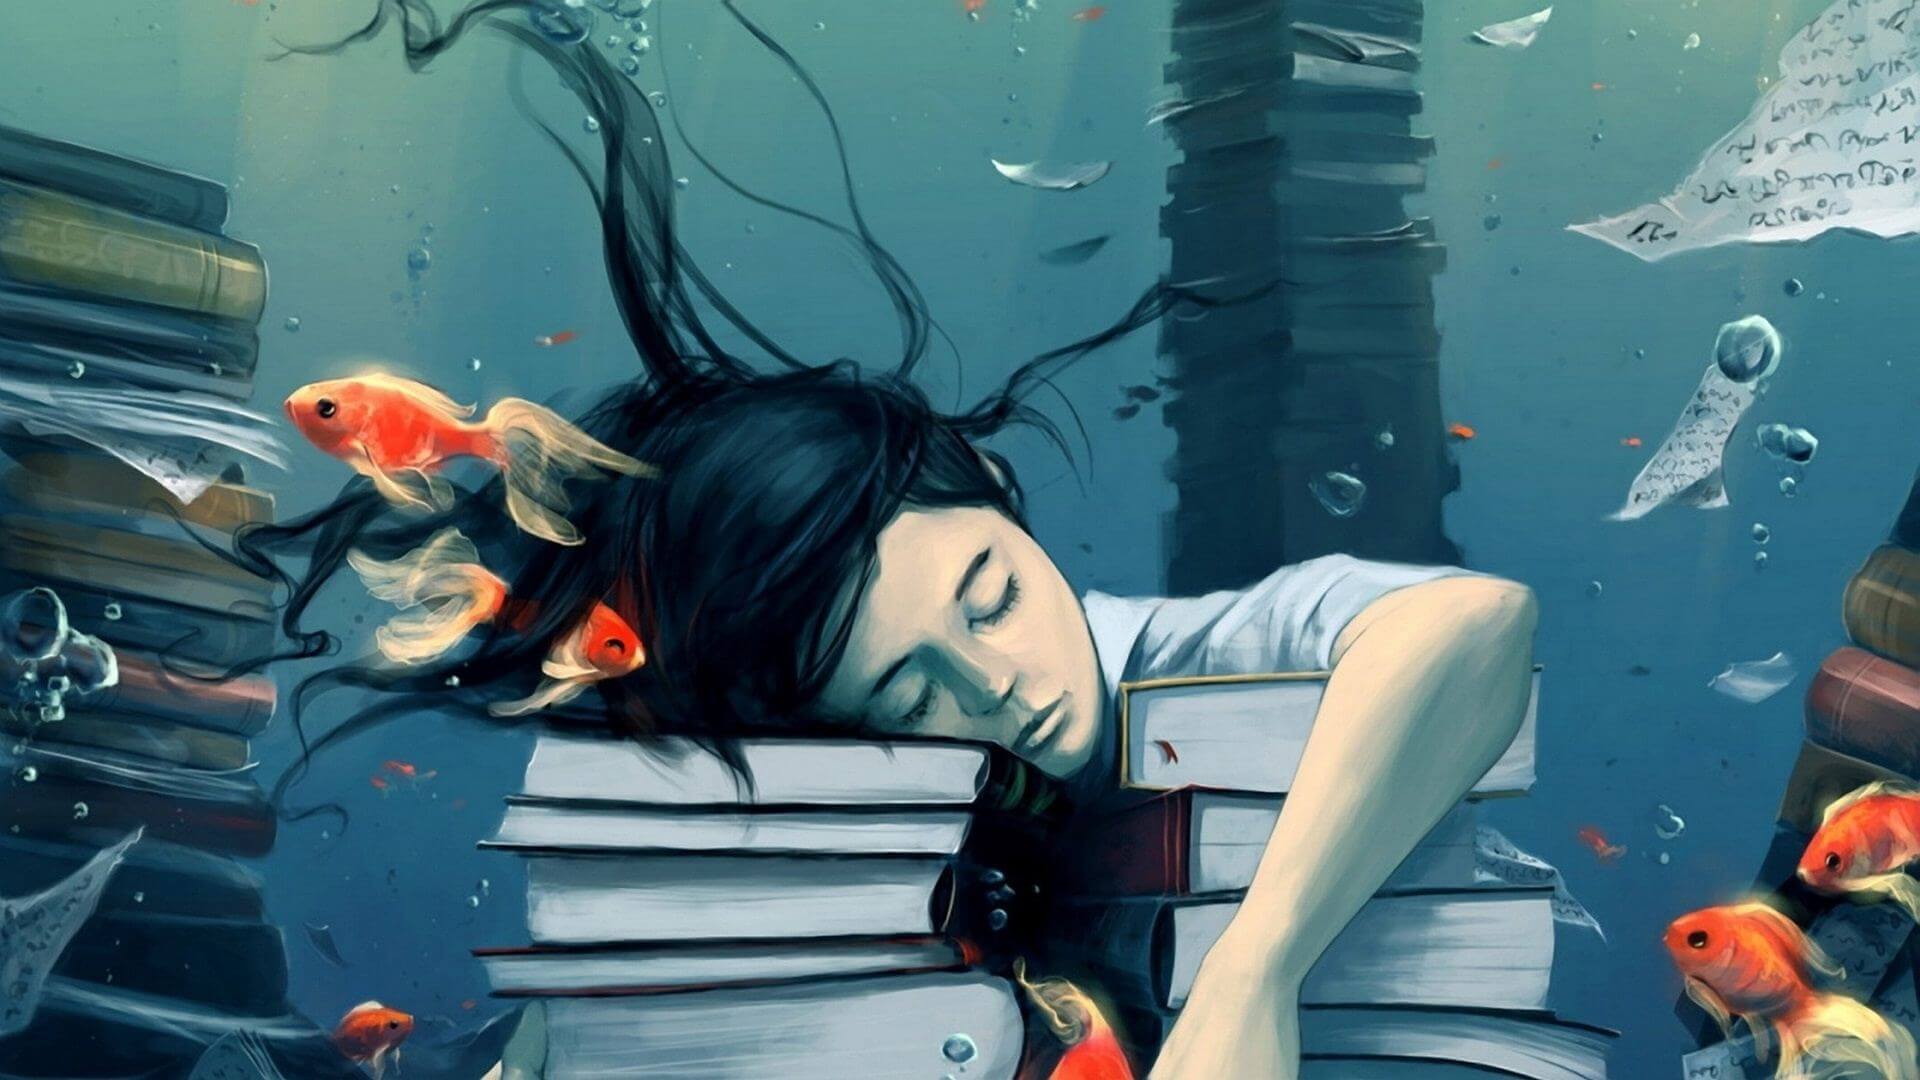 Fantasy-Girl-Sleeping-Underwater-With-Books-Images